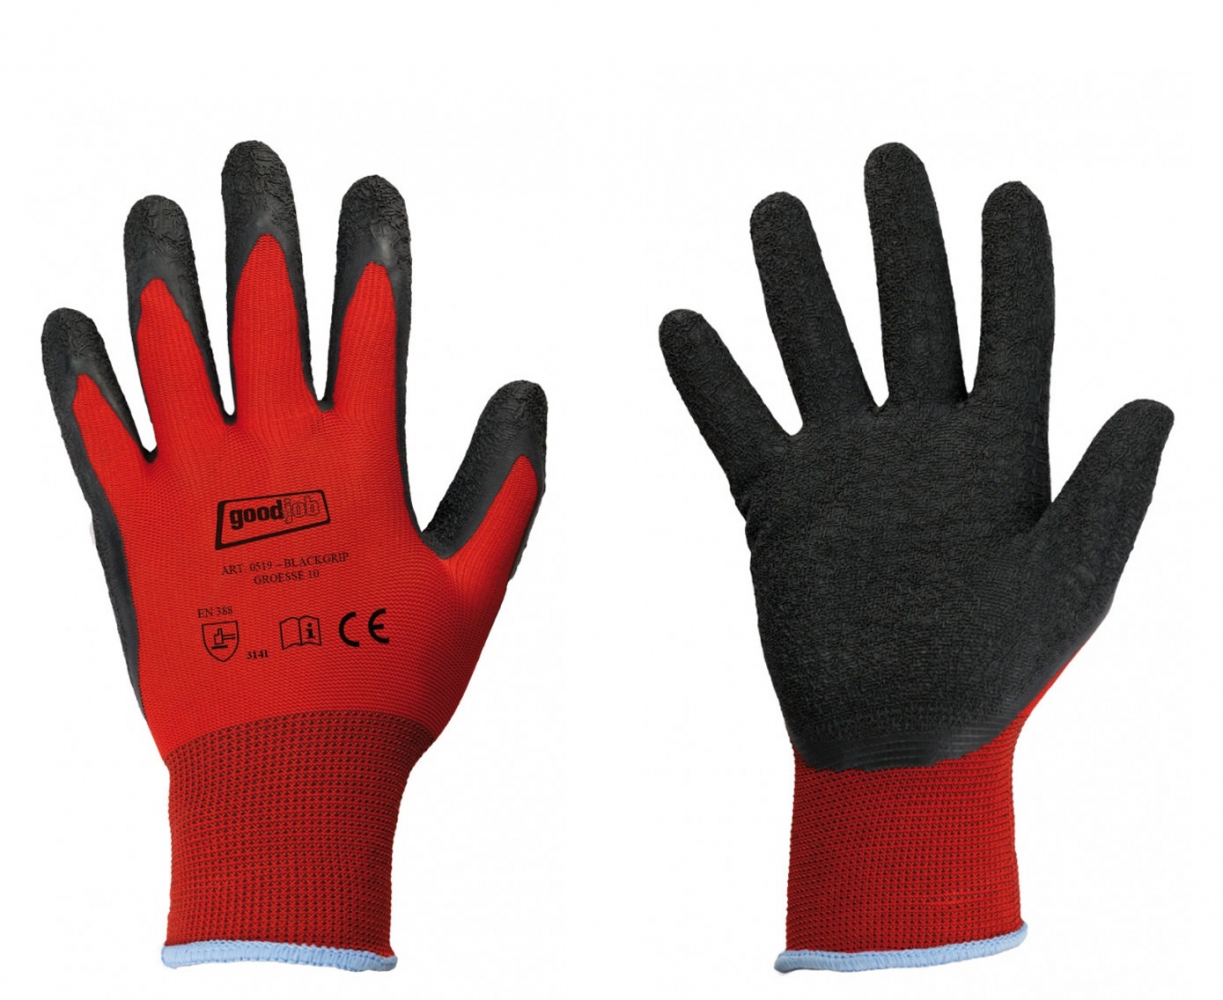 Builders Gloves Latex Coated One Size Greater Excellent Grip